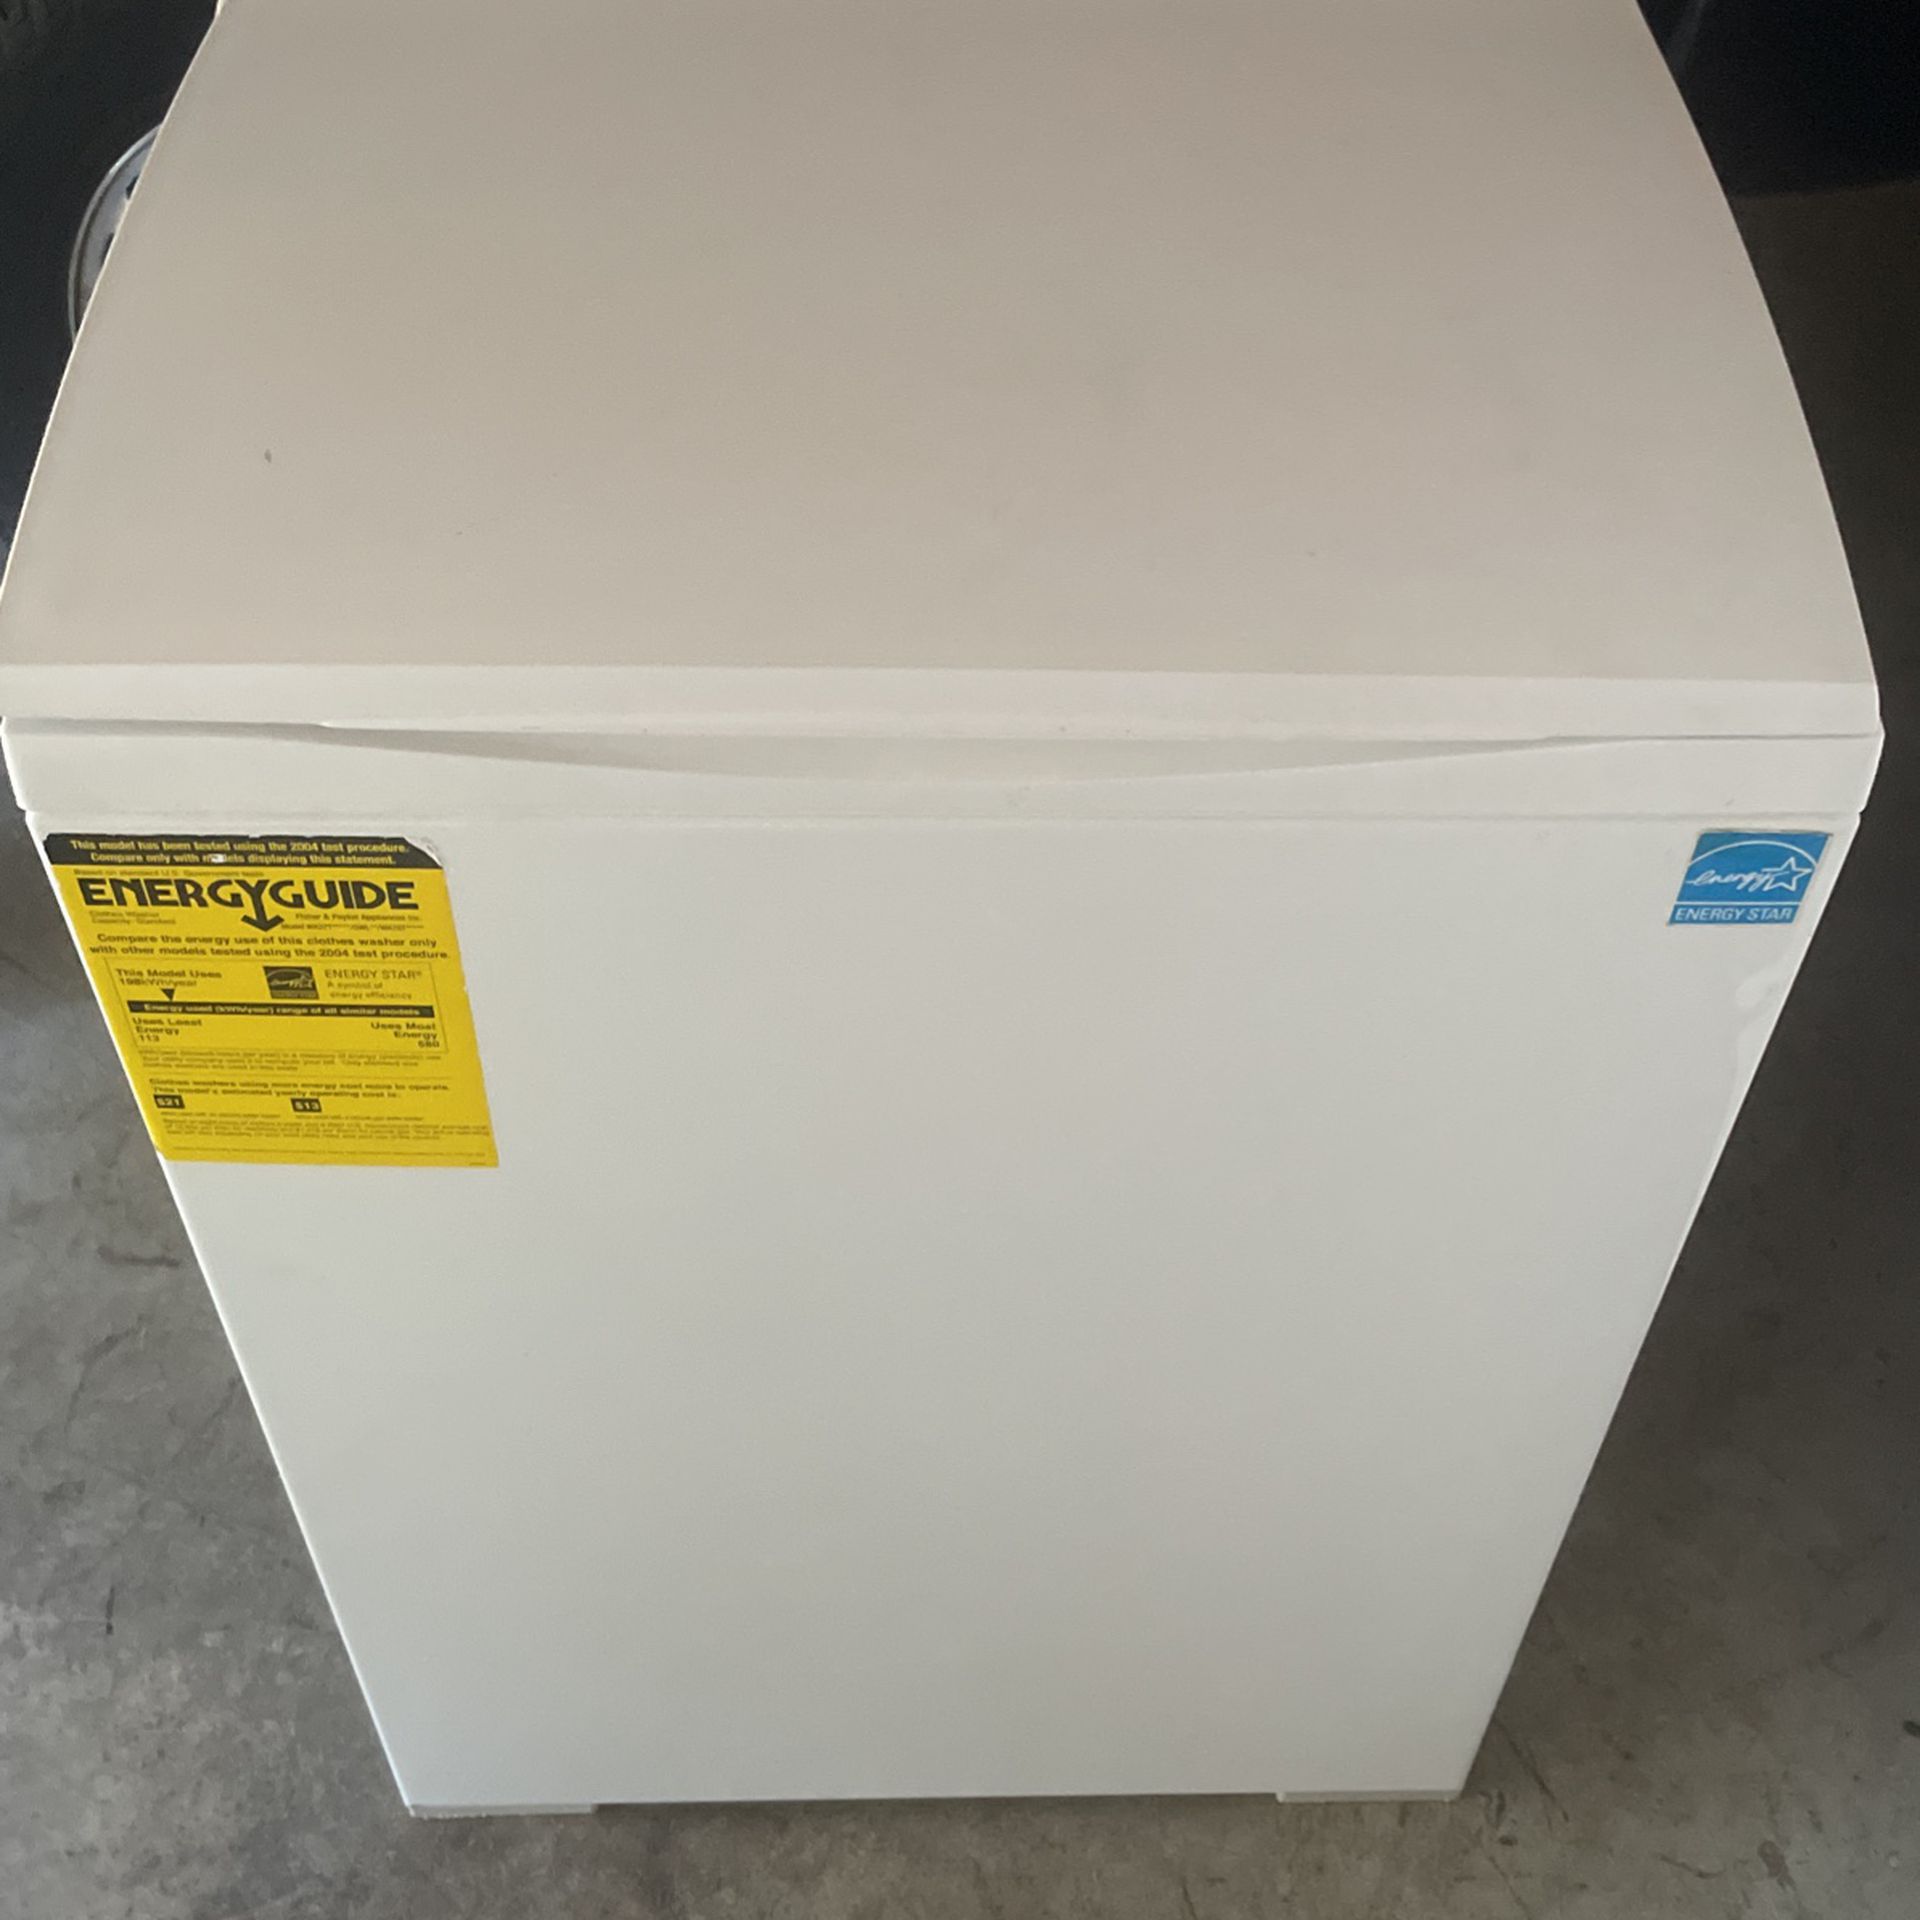 Free Elba Washer- Not Fast Spinning 